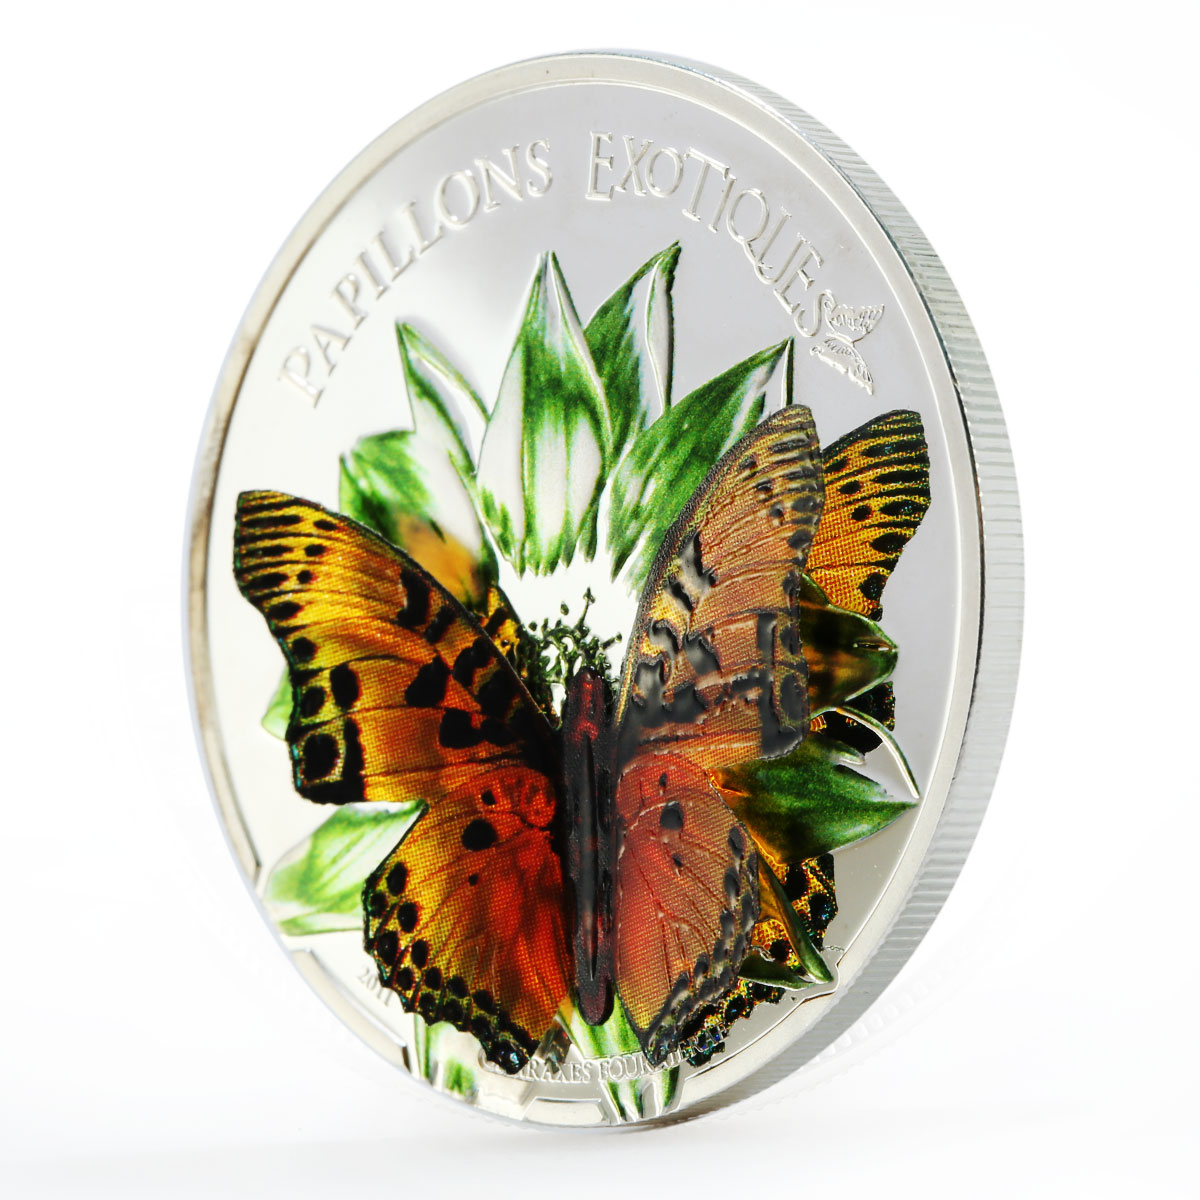 Cameroon 1000 francs Charaxes Fournierae Butterfly colored silver coin 2011